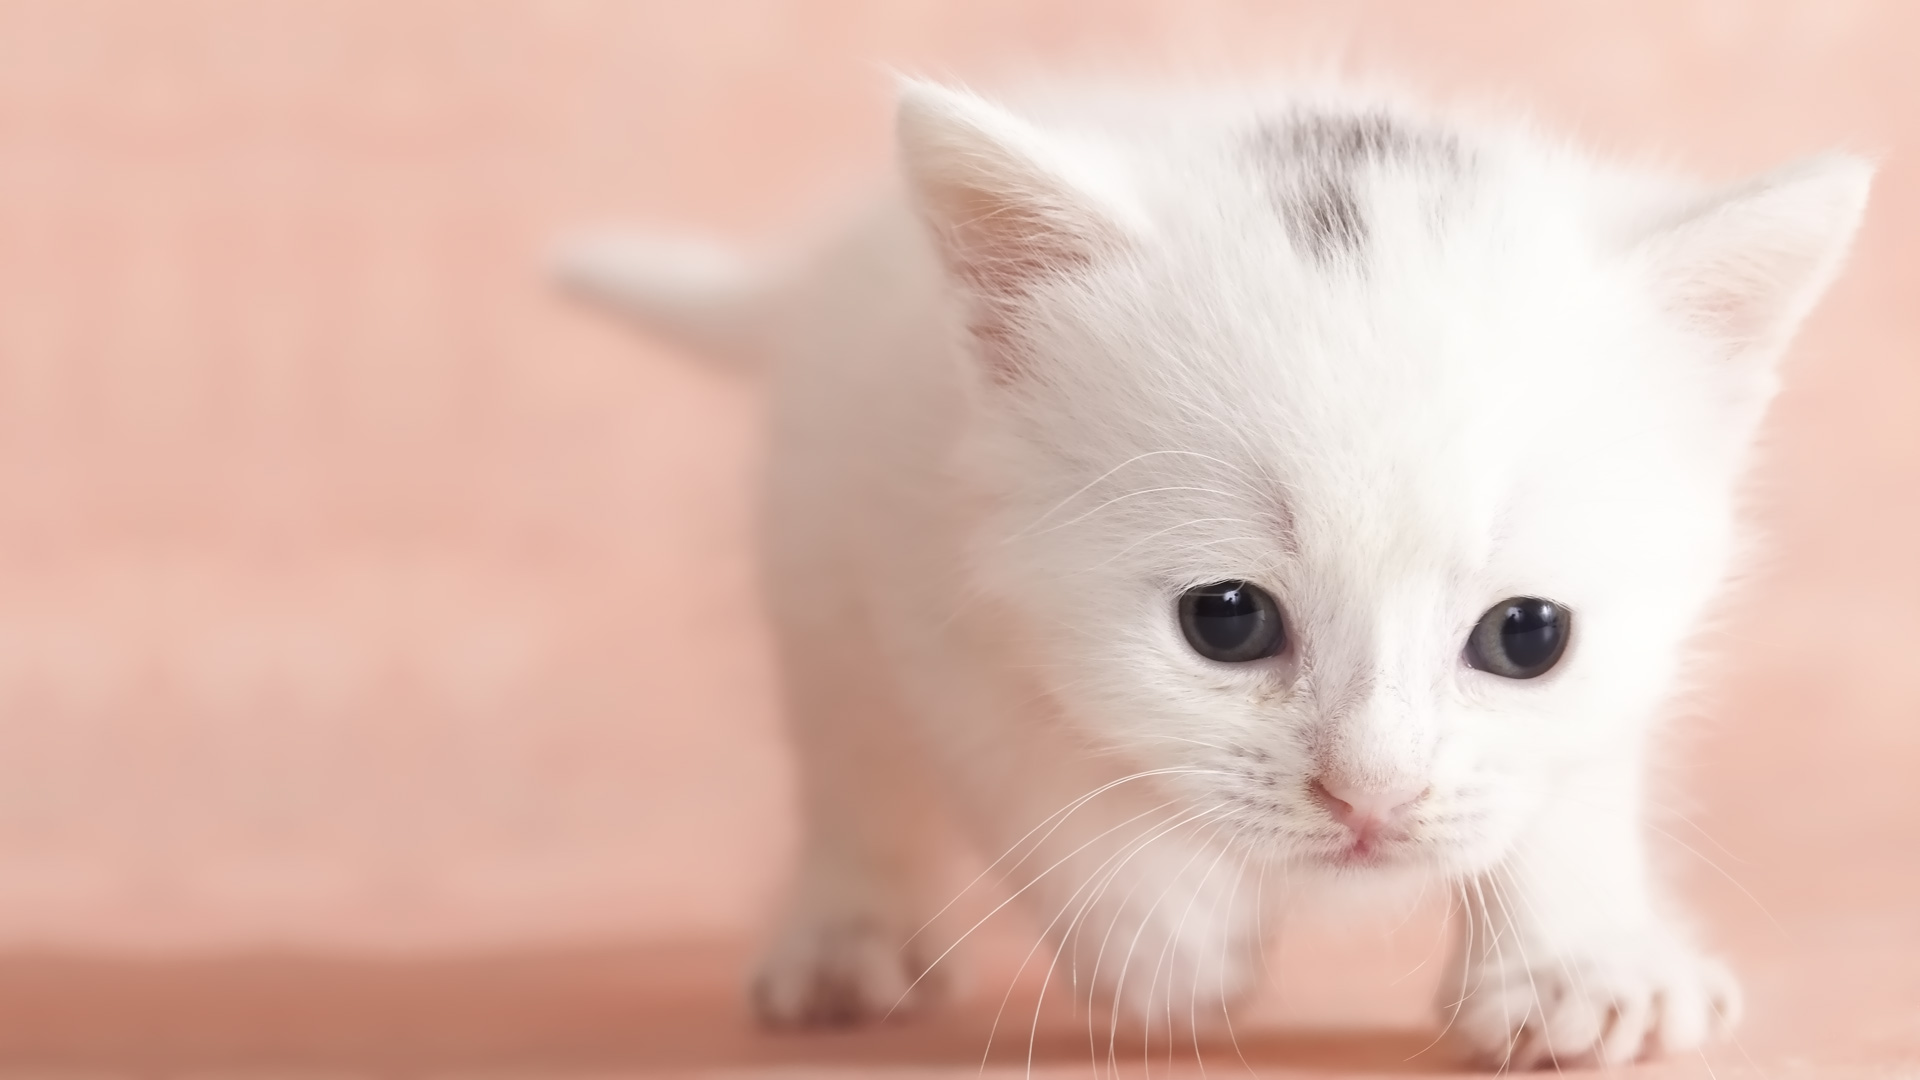 Cute Baby Cat HD Wallpapers   High Definition Wallpapers 1920x1080